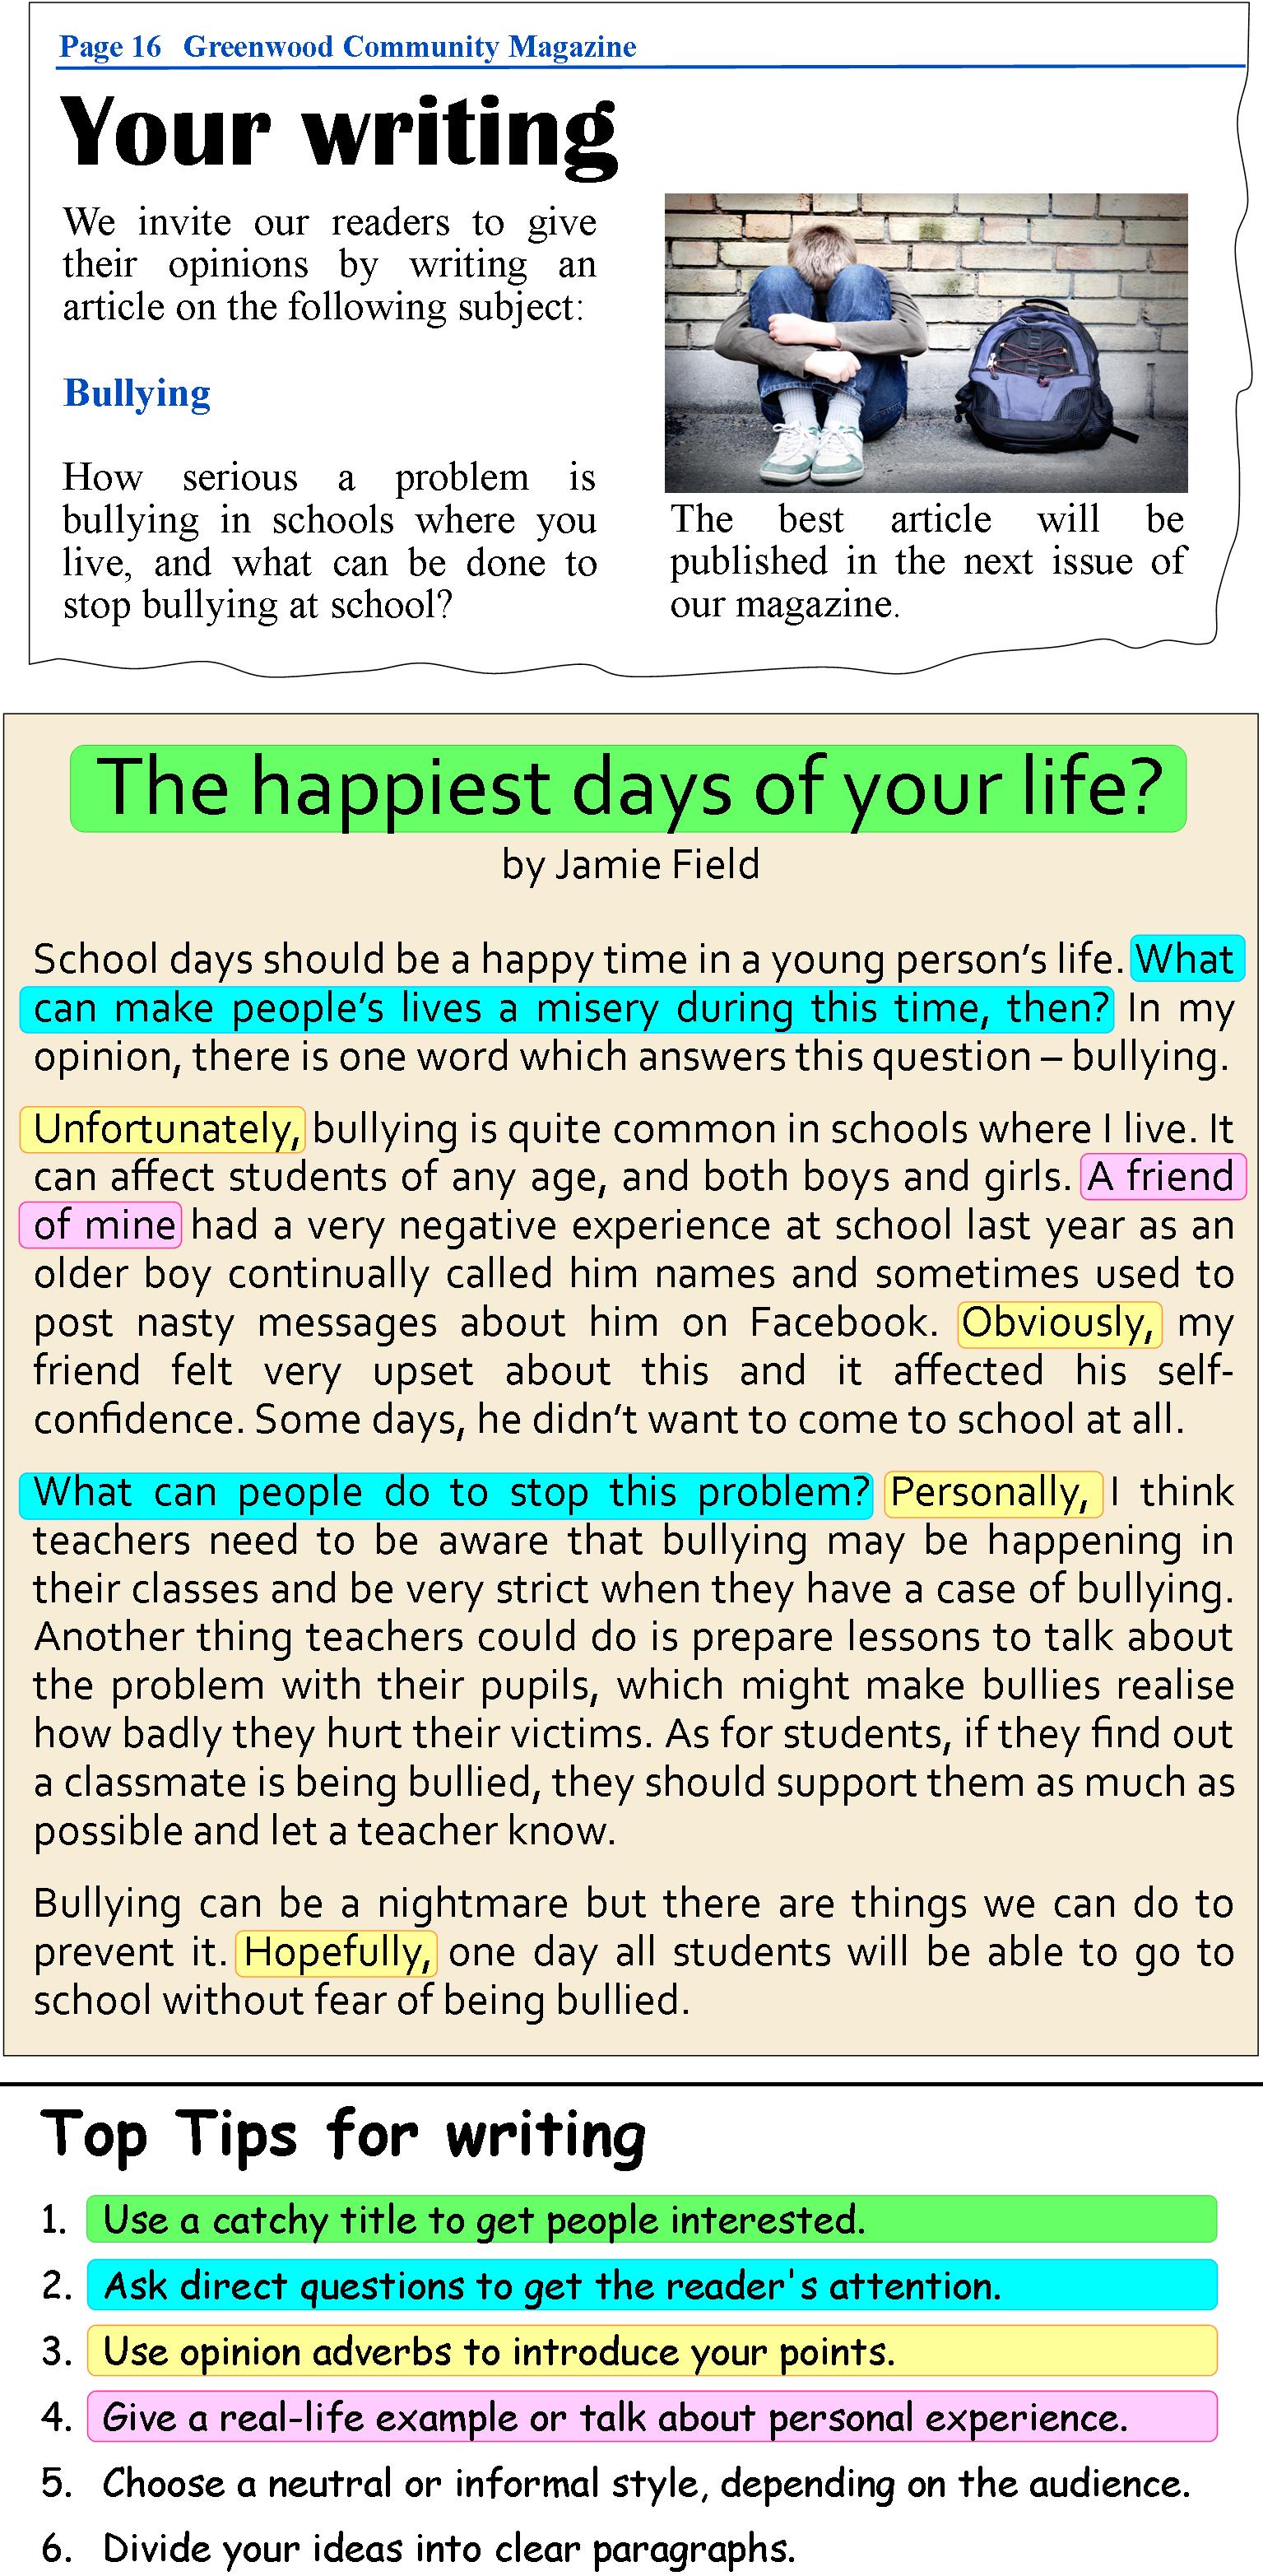 the happiest days of your life article